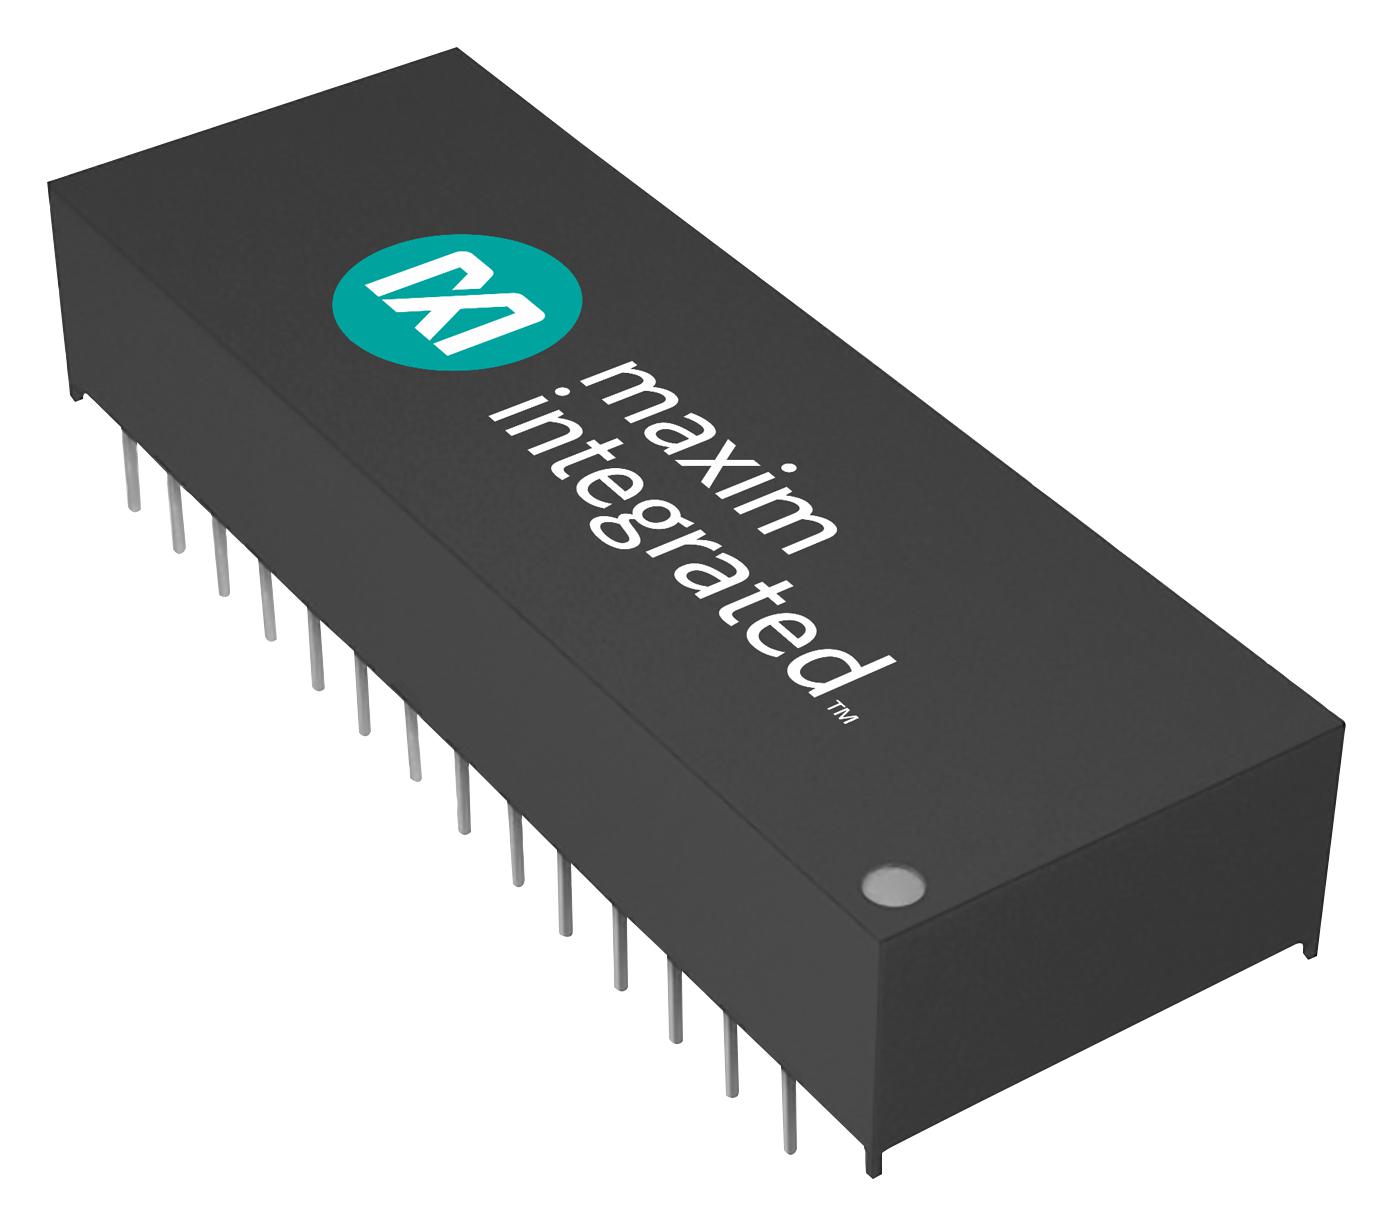 DS1250Y-70IND+ NON-VOLATILE SRAM, 4MBIT, 70NS, EDIP-32 MAXIM INTEGRATED / ANALOG DEVICES